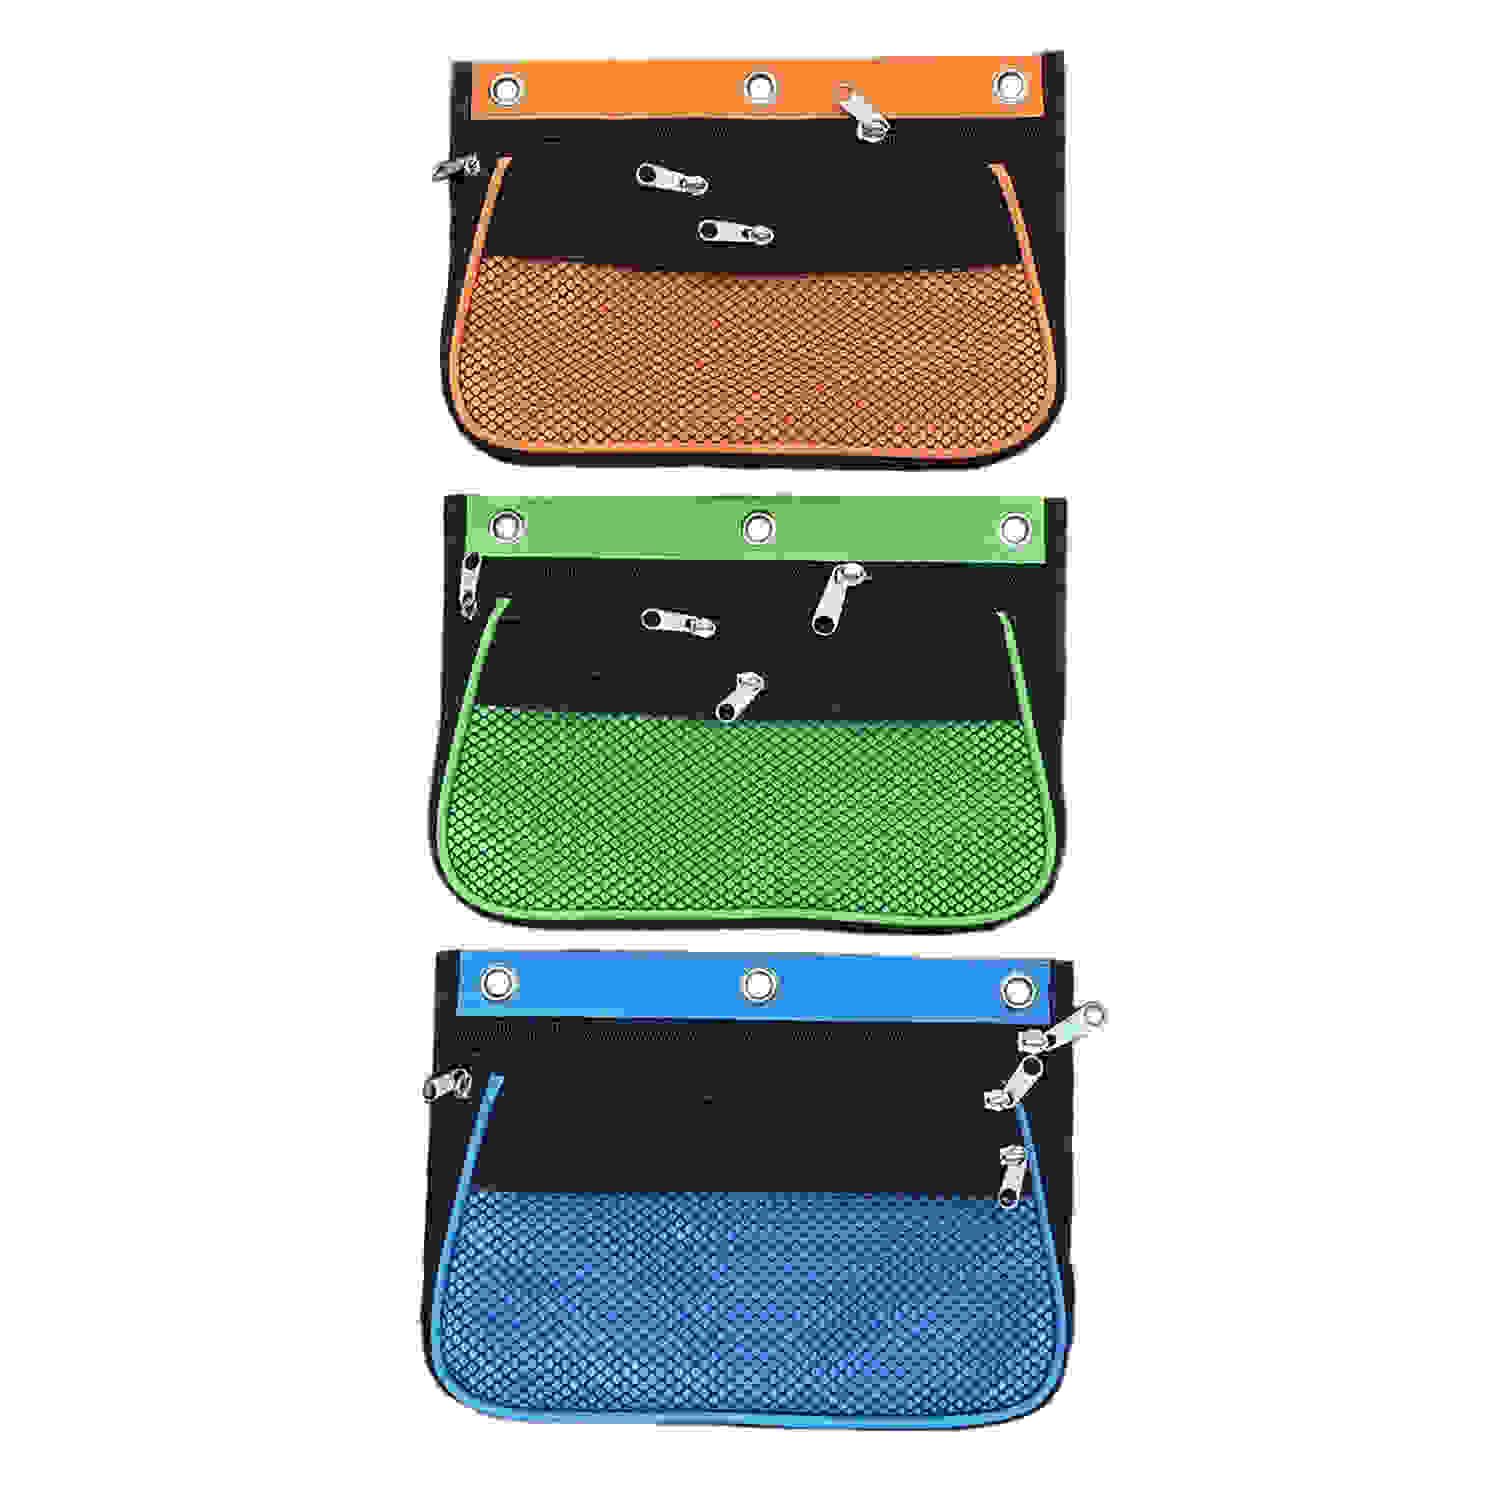 Expanding Pencil Pouch, 3 Pocket, 10.25"W x 7.25"H x 2.5"D, Assorted Colors, Pack of 24